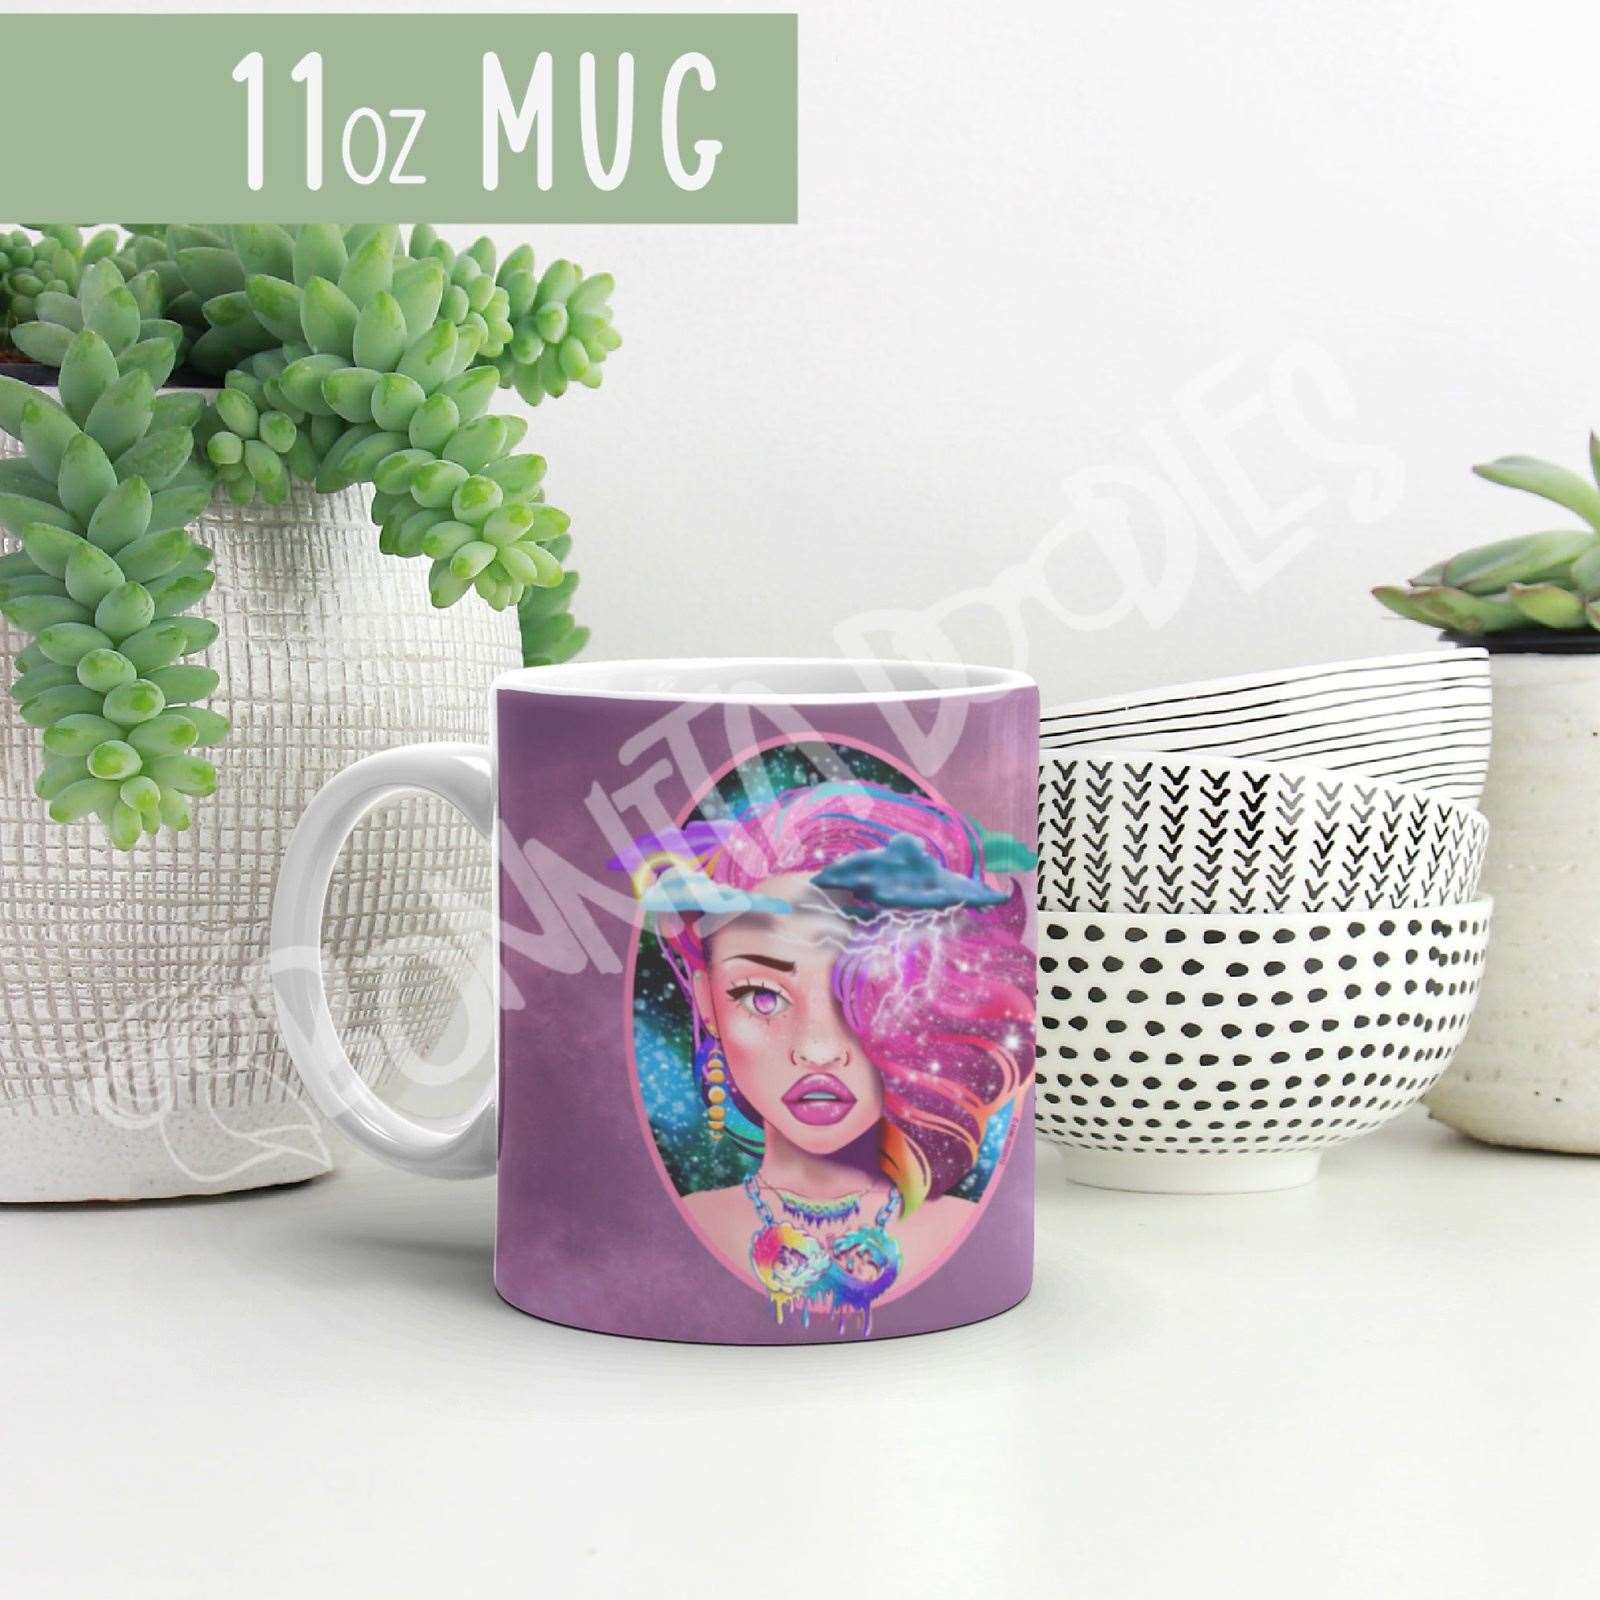 Neurospicy mug - made to order - can be personalised